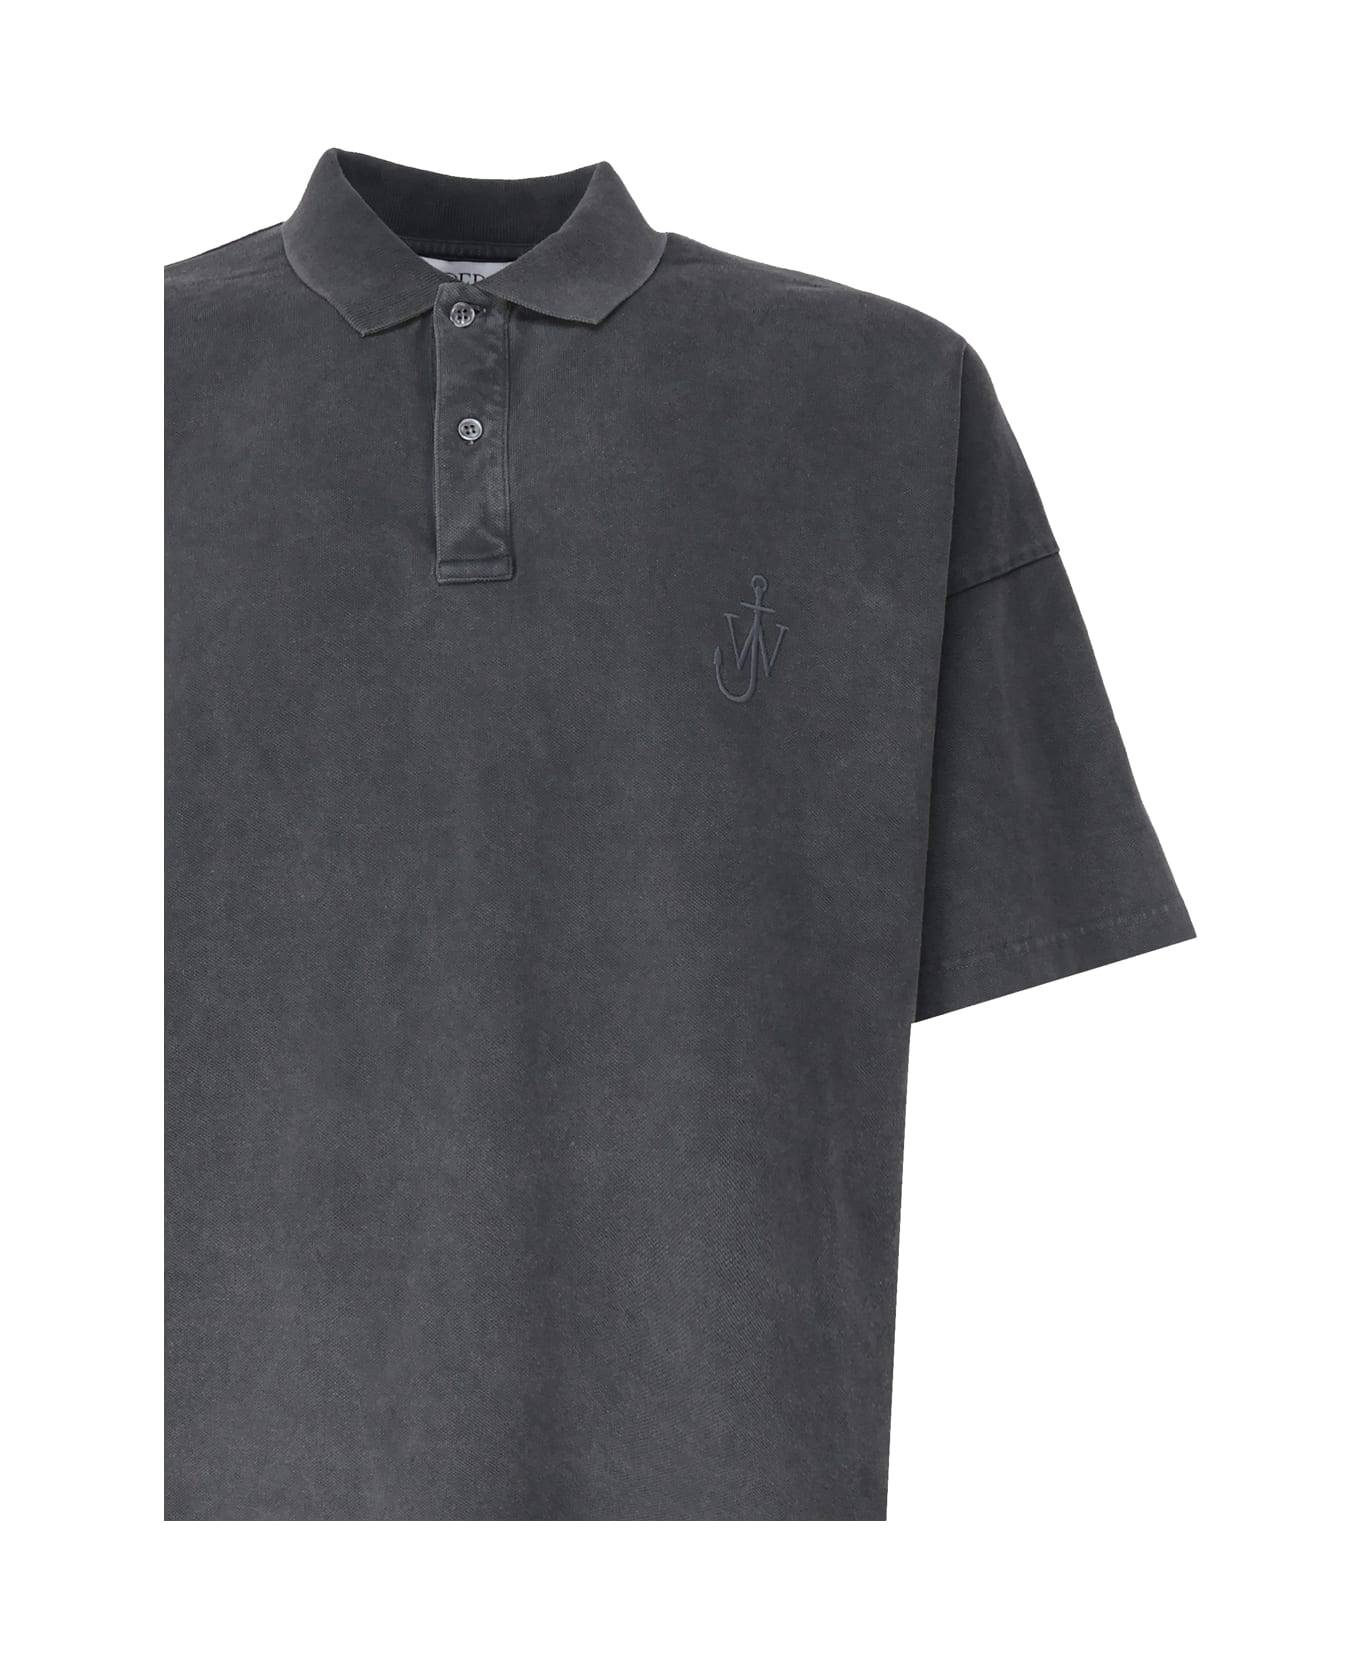 J.W. Anderson Polo Shirt With Embroidered Logo - Grey ポロシャツ